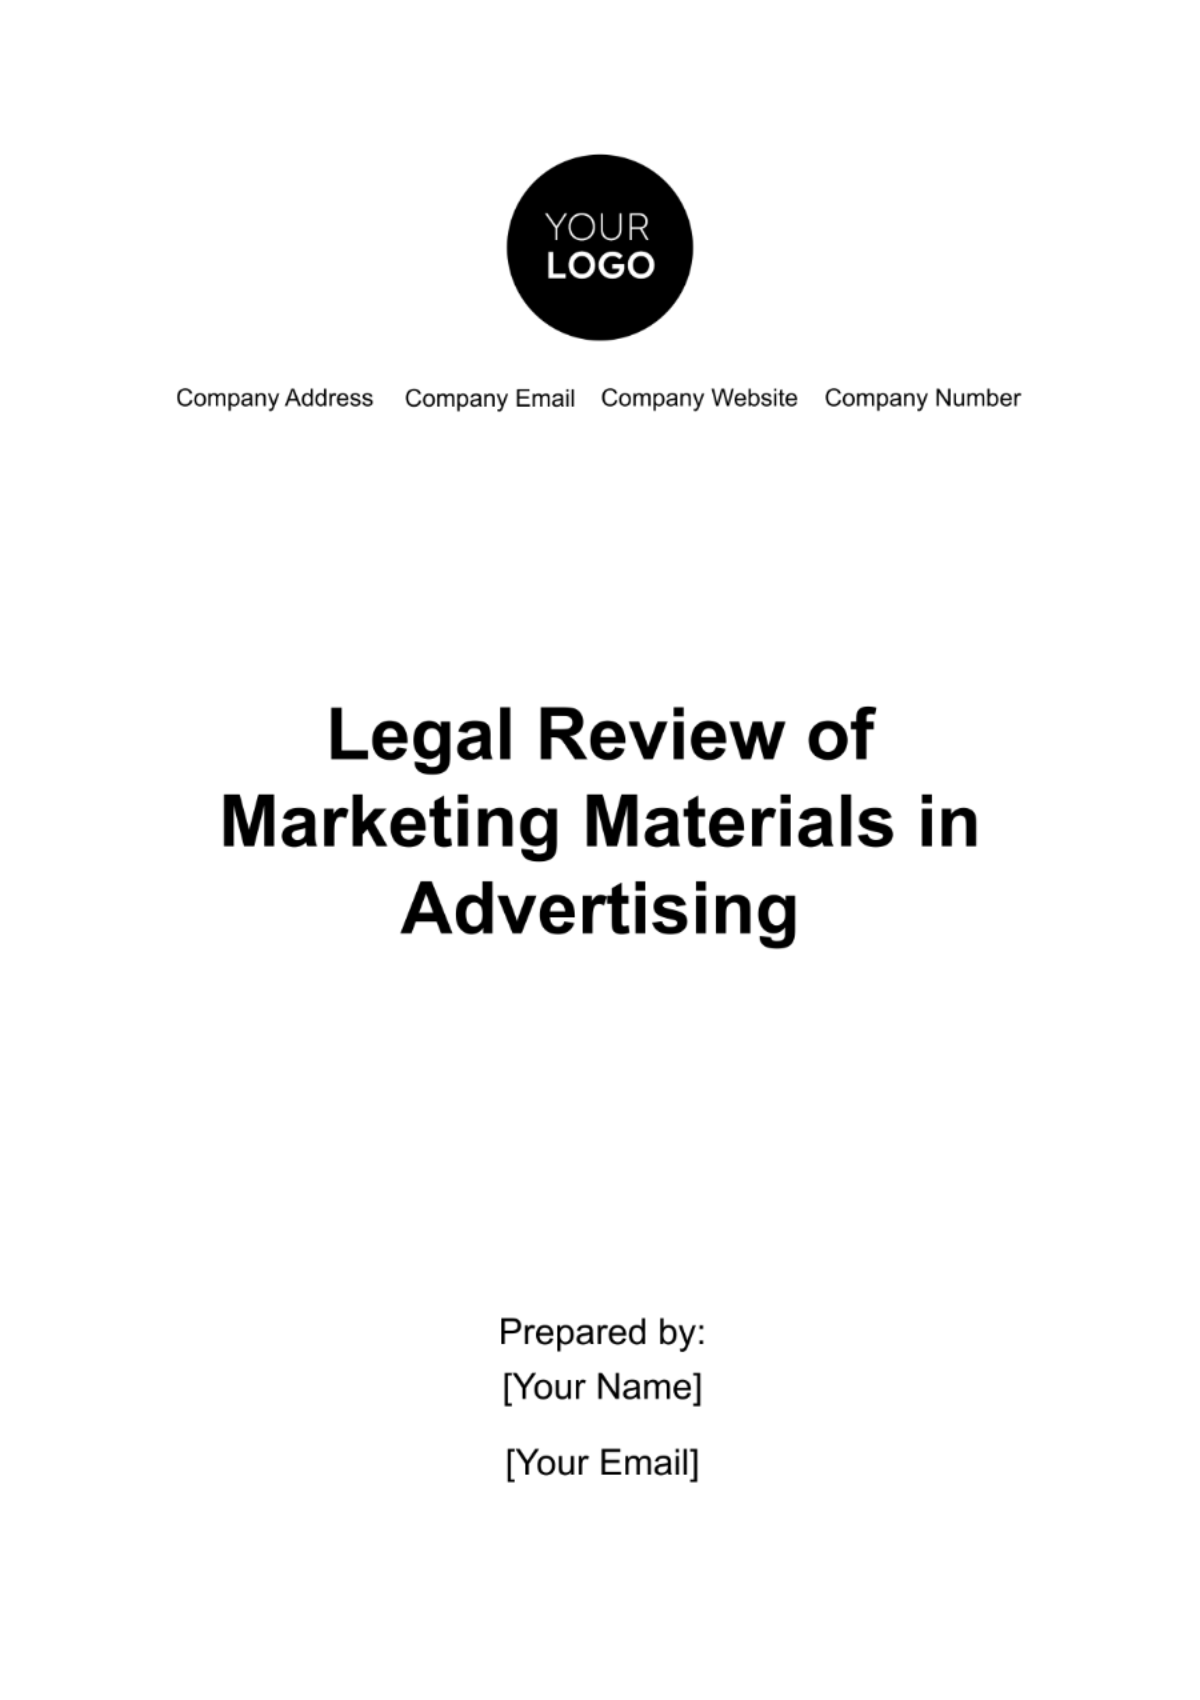 Legal Review of Marketing Materials in Advertising Template